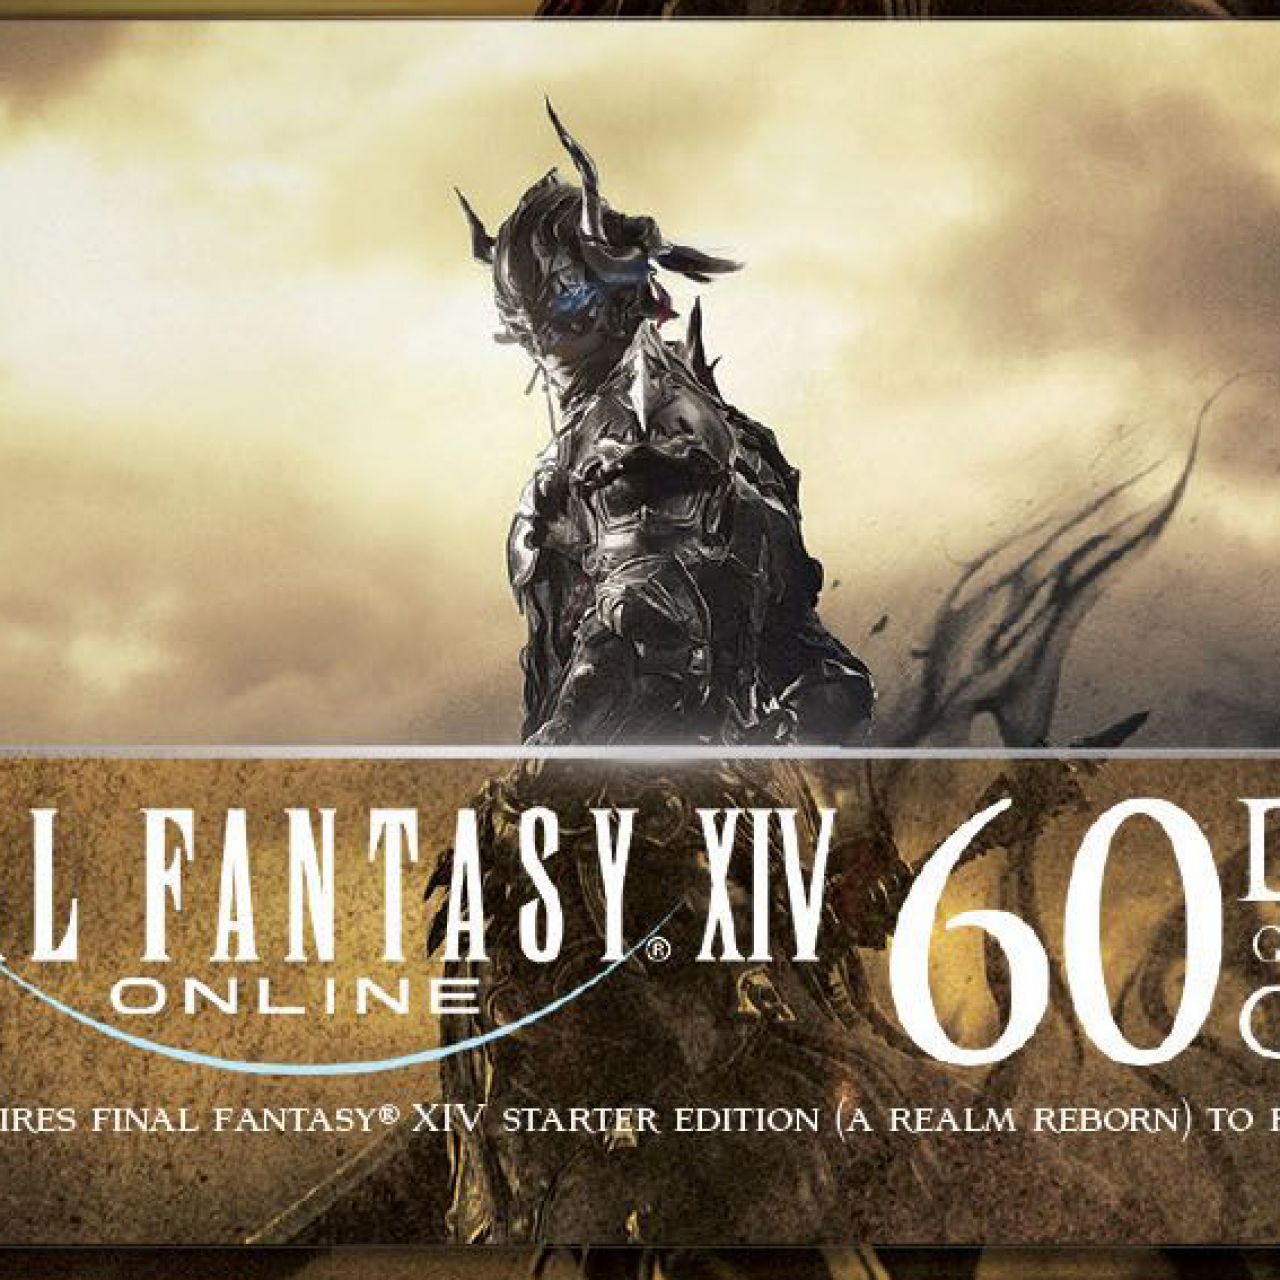 how to re download ff14 from square